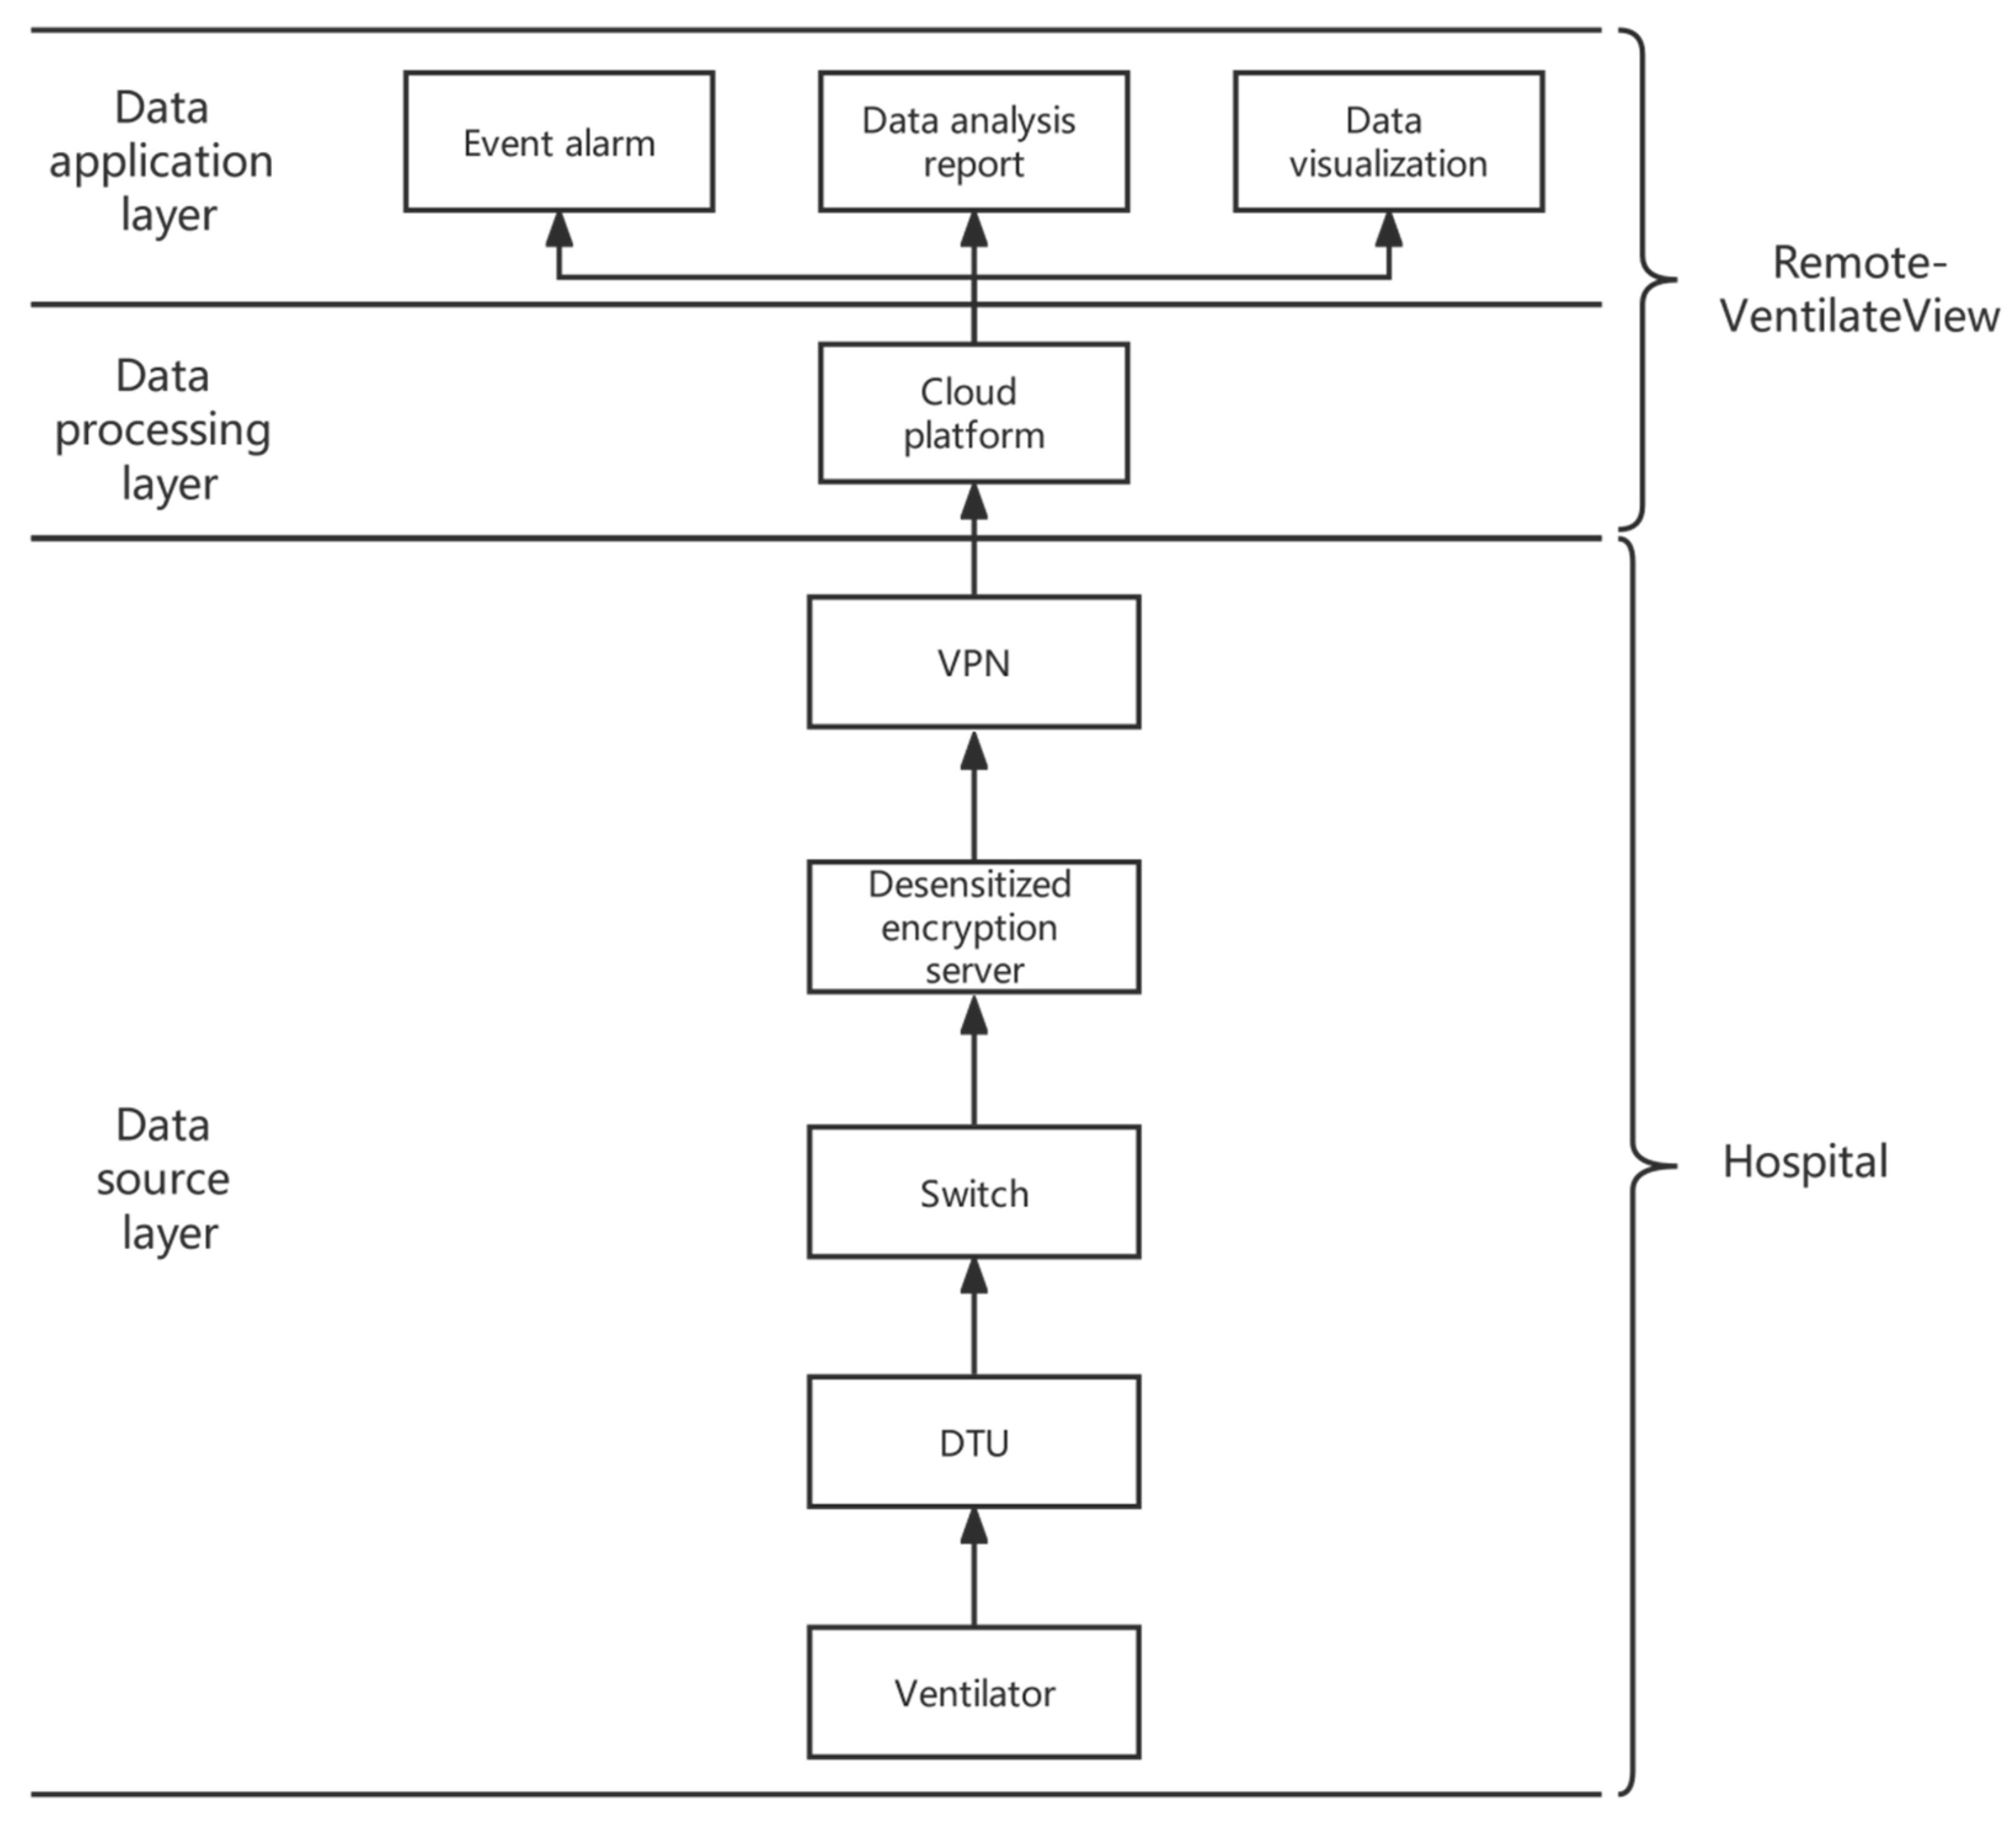 Simple RC network model of ventilator system and patient, with